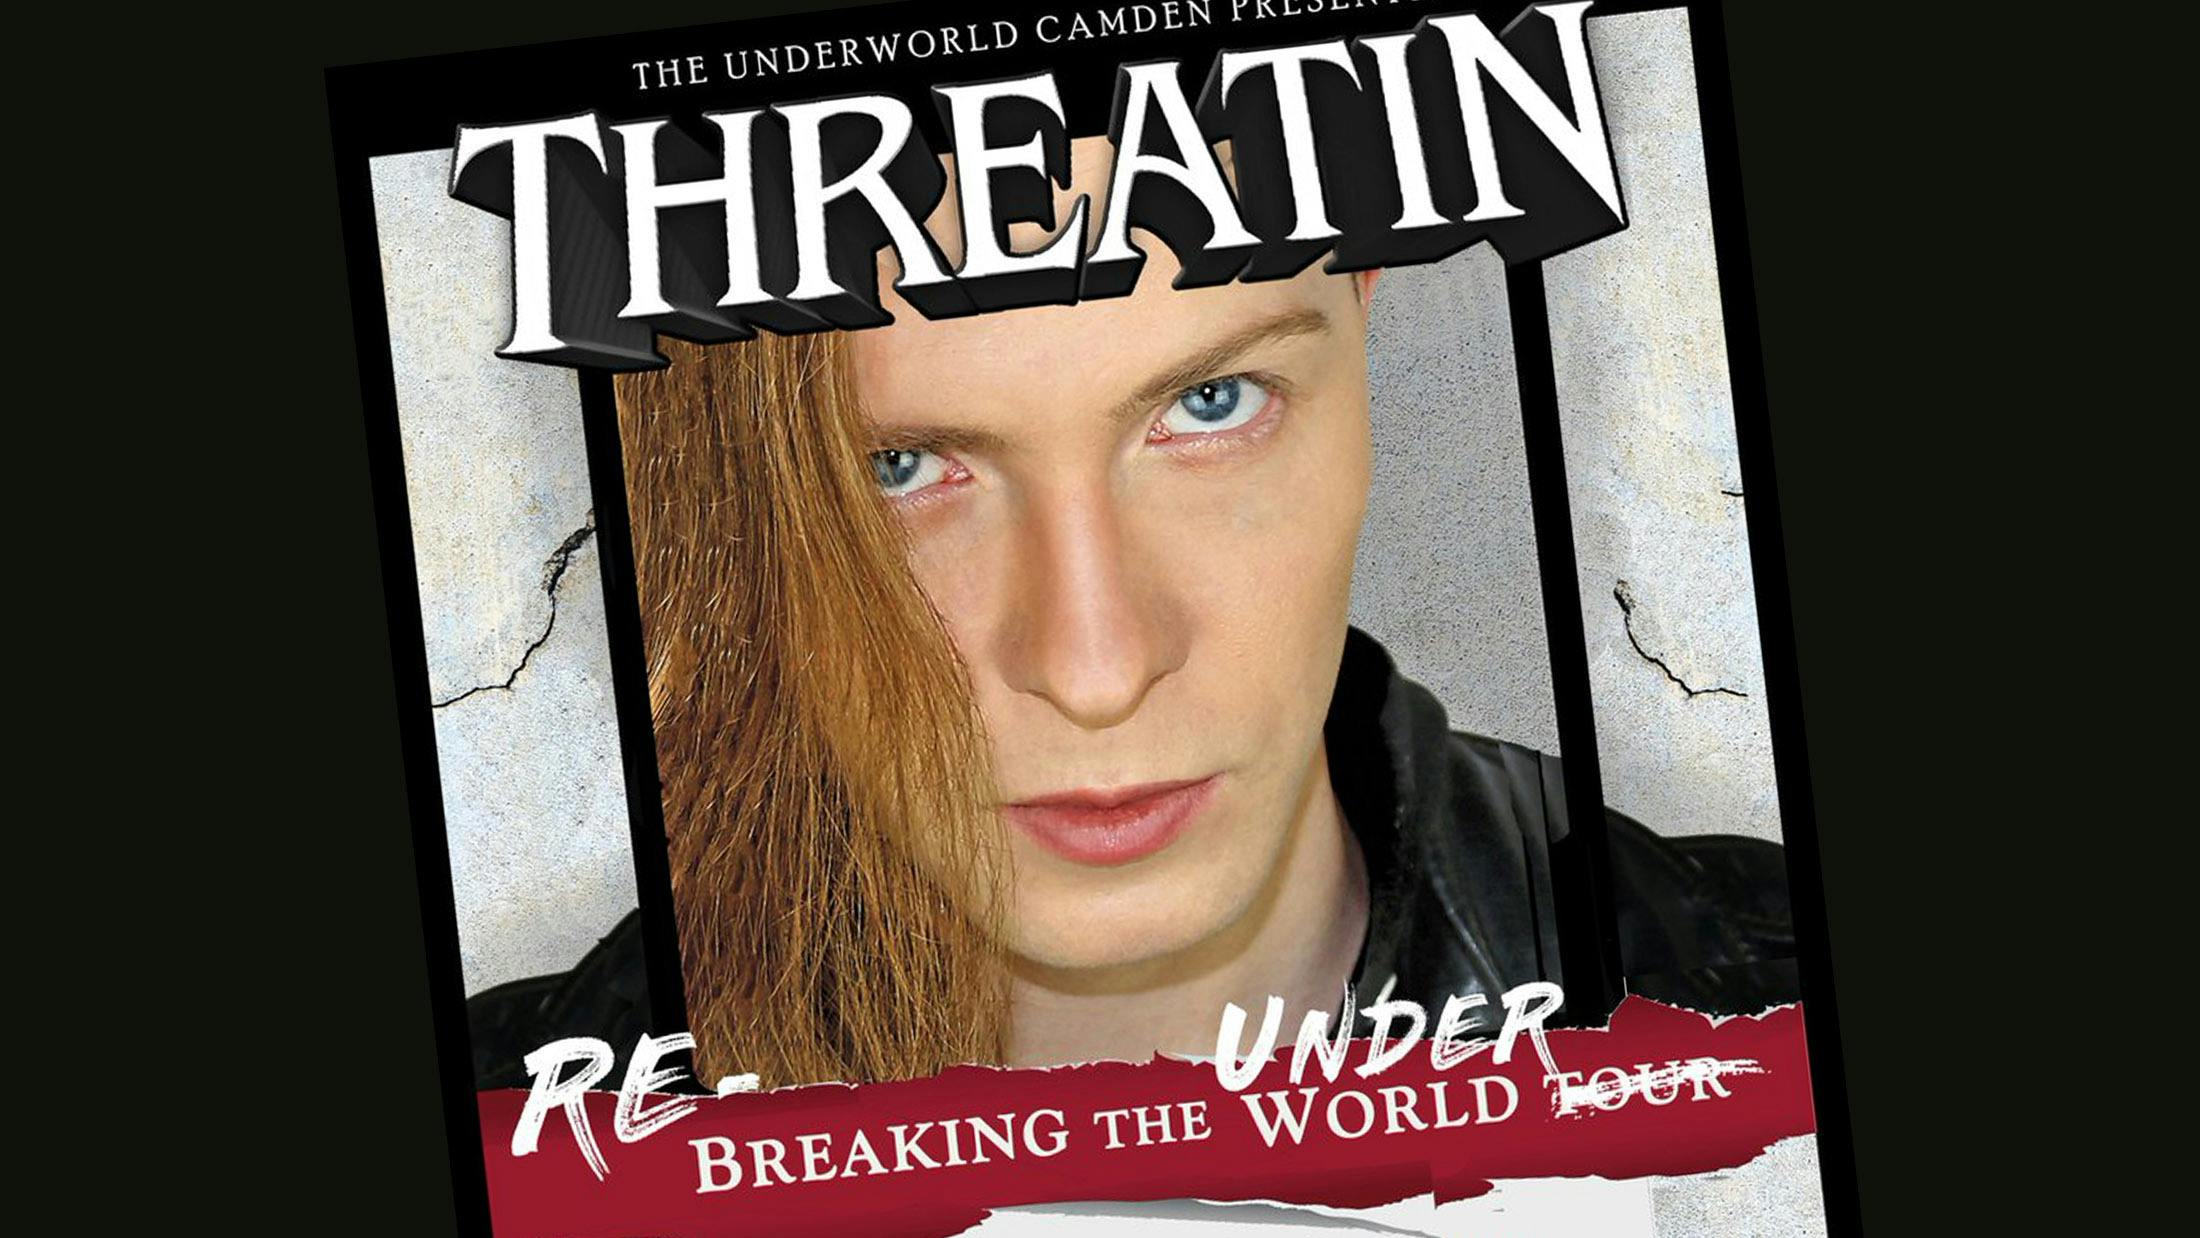 The Unbelievable Story Of Threatin: Heavy Metal's Fyre Festival Moment